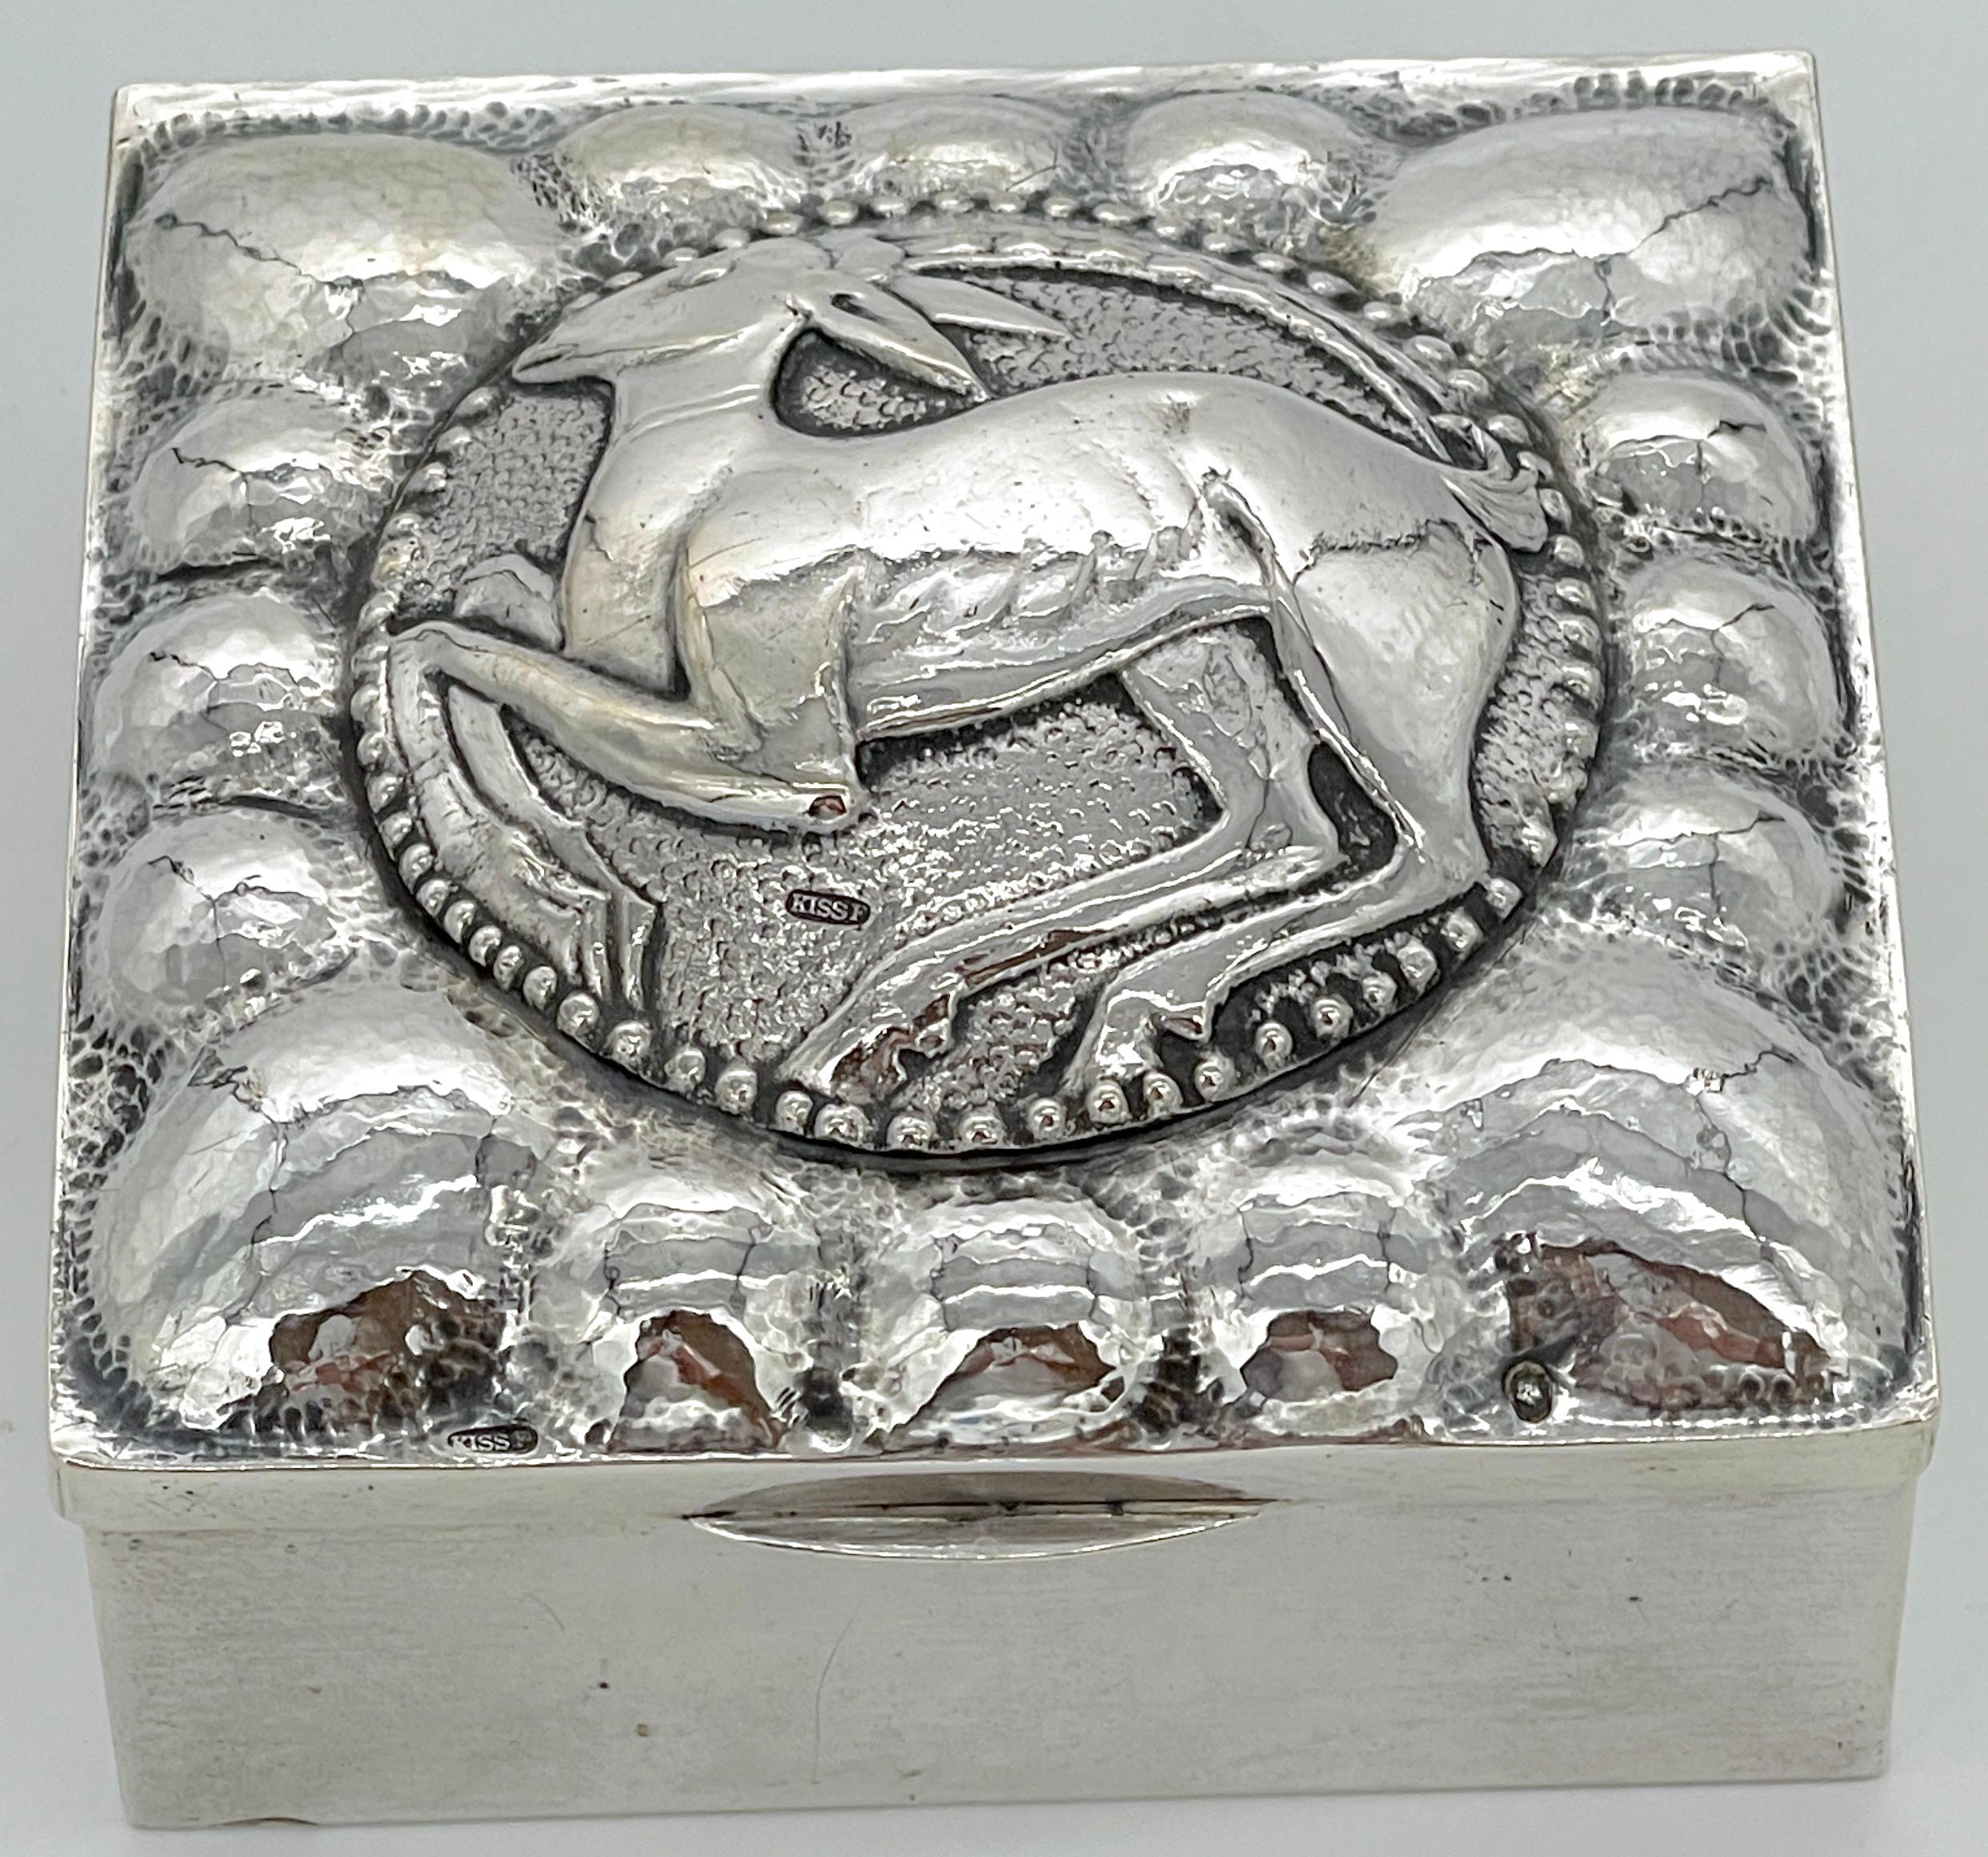 Fine French Sterling Art Deco Ram Motif Square Table Box, Circa 1925
French Silver hallmark Minervas Head with #3 and Silversmith mark of  KISS F

An Extraordinary example of signed French Art Deco Silver, this exquisite French Sterling Art Deco Ram